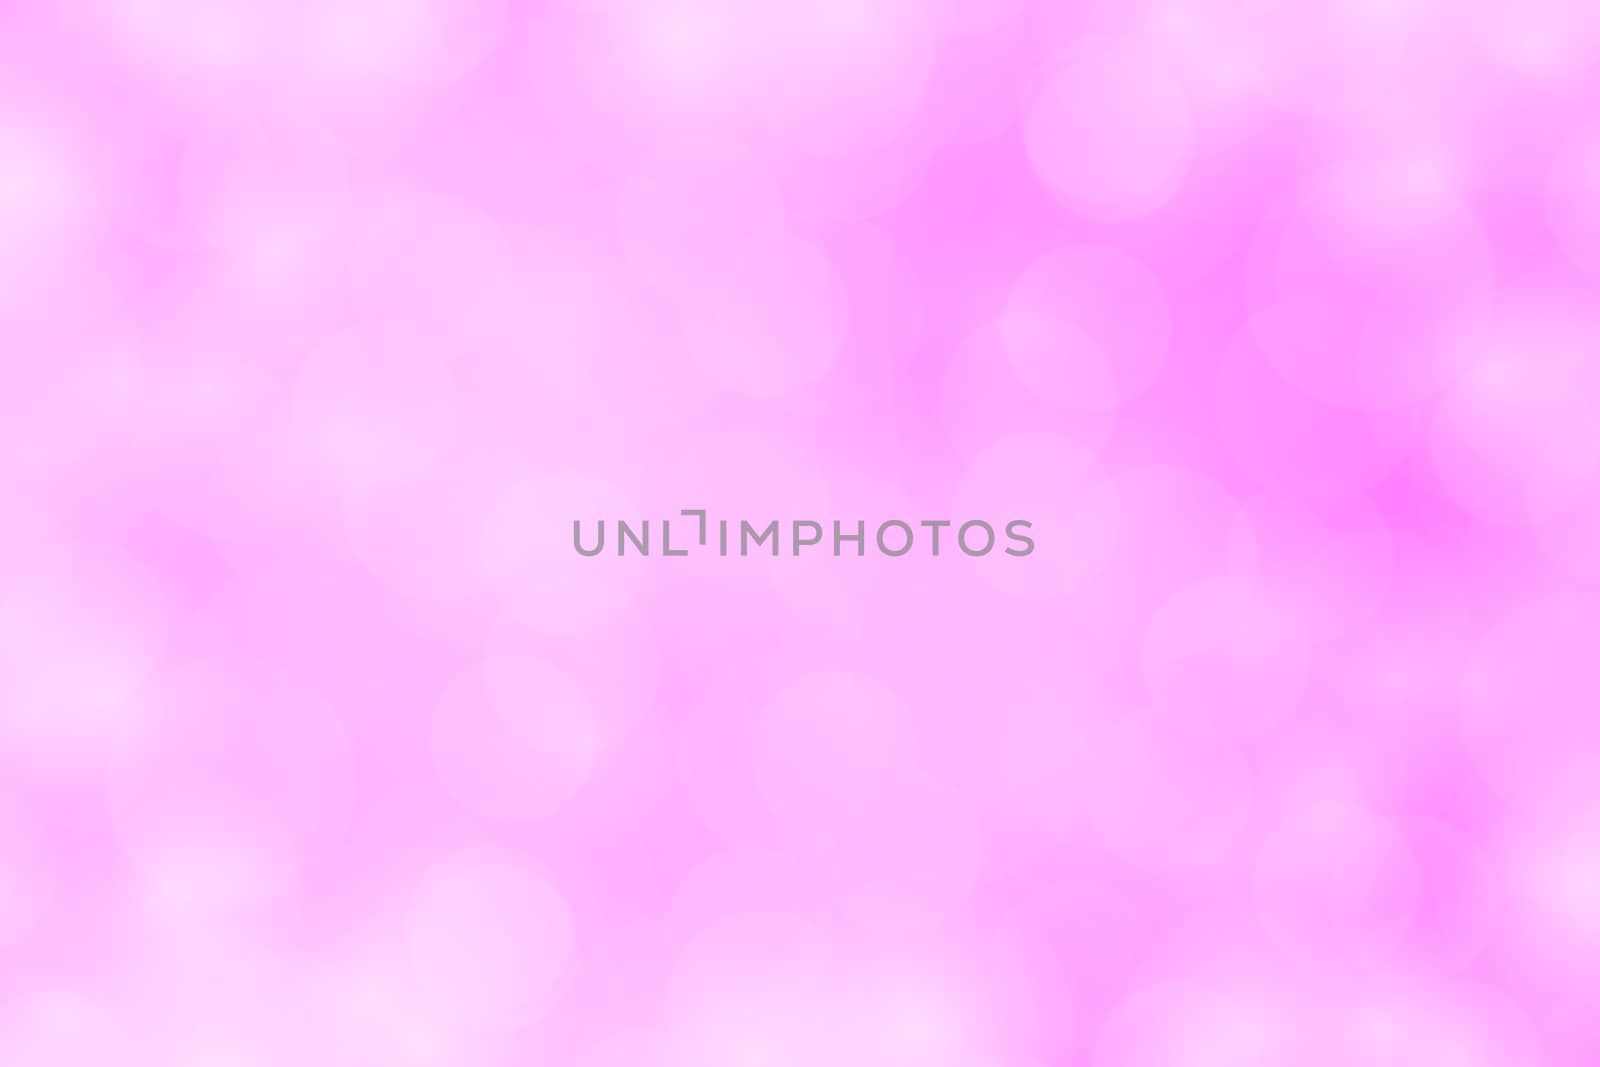 blurred bokeh soft pink gradient background, bokeh colorful light pink shine wallpaper, colorful bokeh lights gradient blurred soft